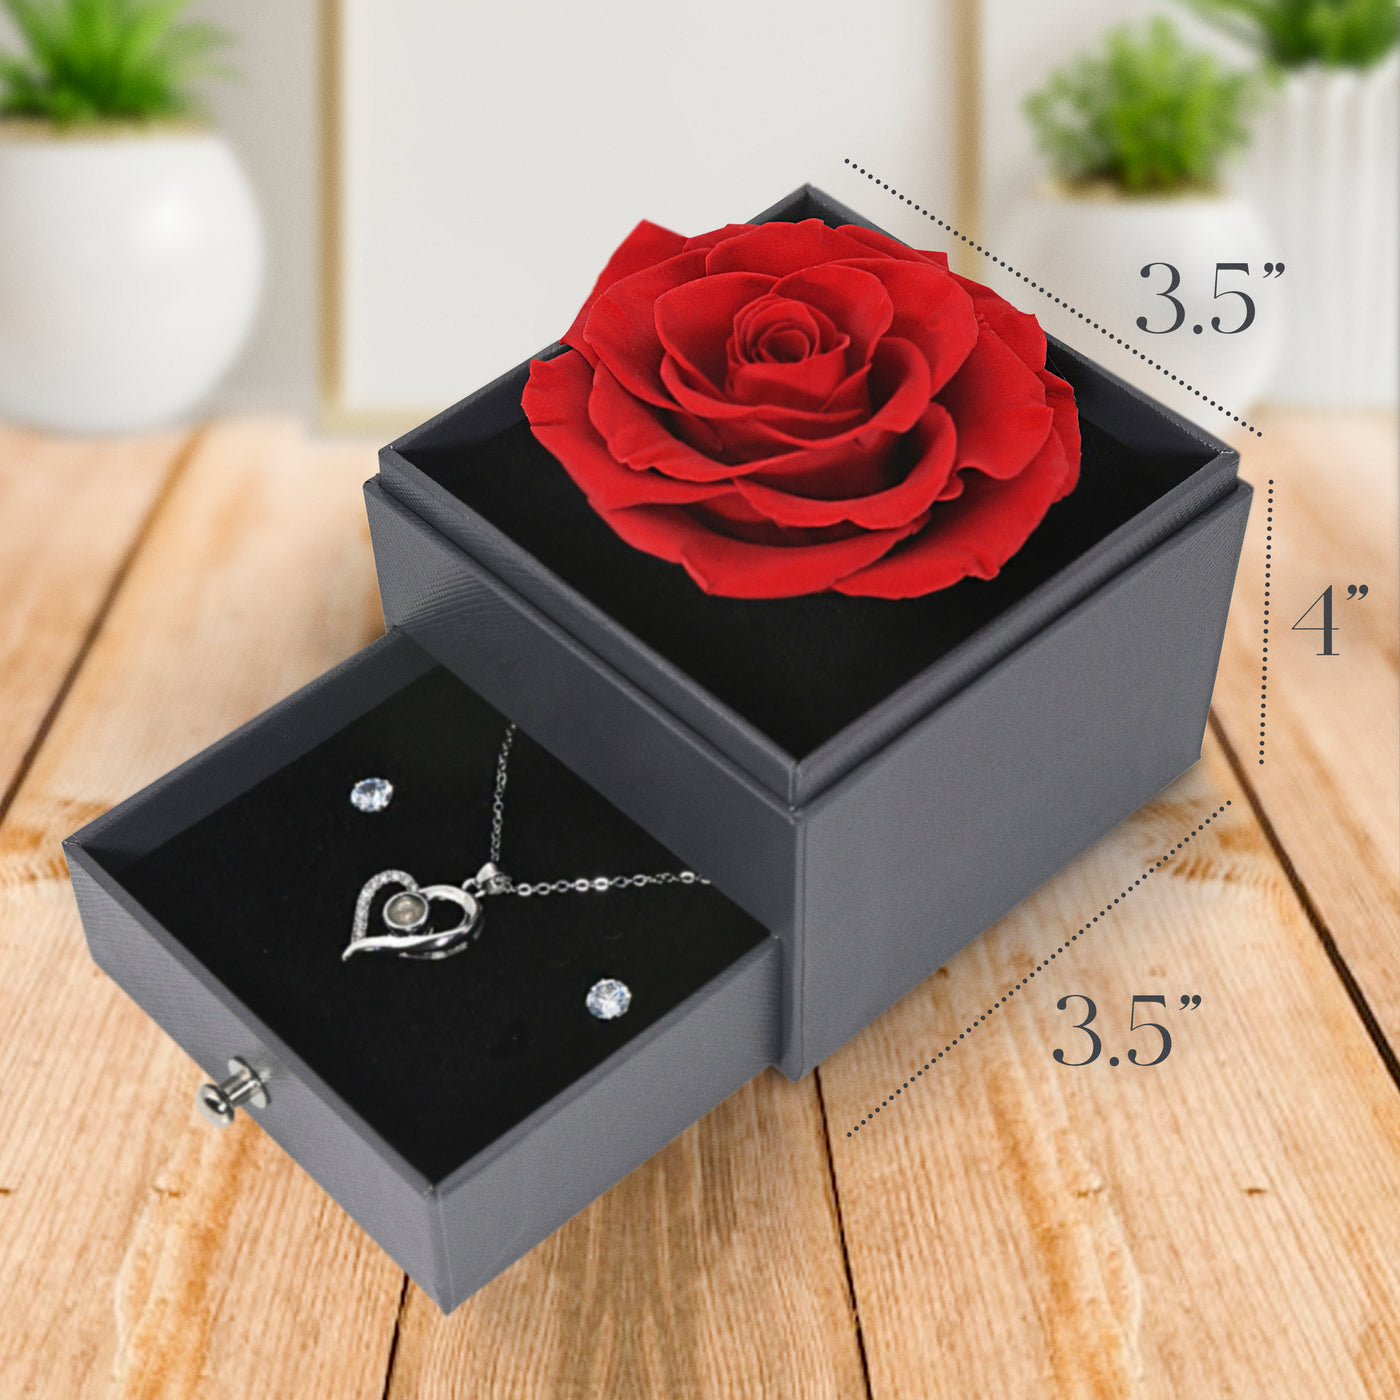 Glamour Boutique Preserved Rose in a Box with I Love You Necklace in 100 Languages - Enchanted Flower Jewelry Set with Silver Stud Earrings - Red